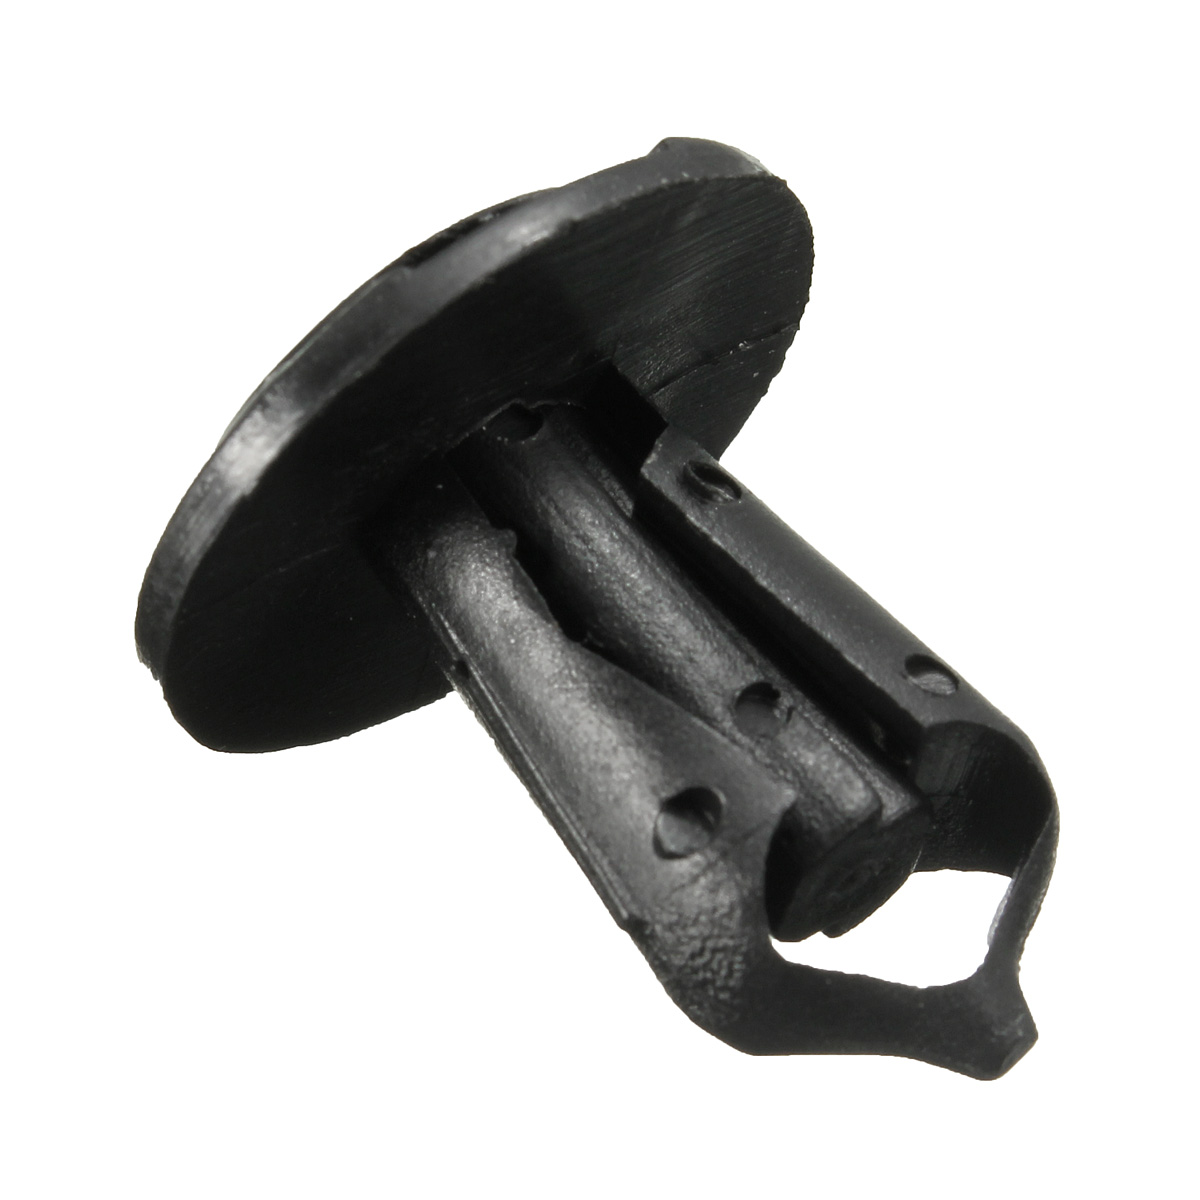 Wheel-Arch-Clips-Trim-Liner-Fastener-for-Land-Rover-Discovery-P38-ANR2224-1007359